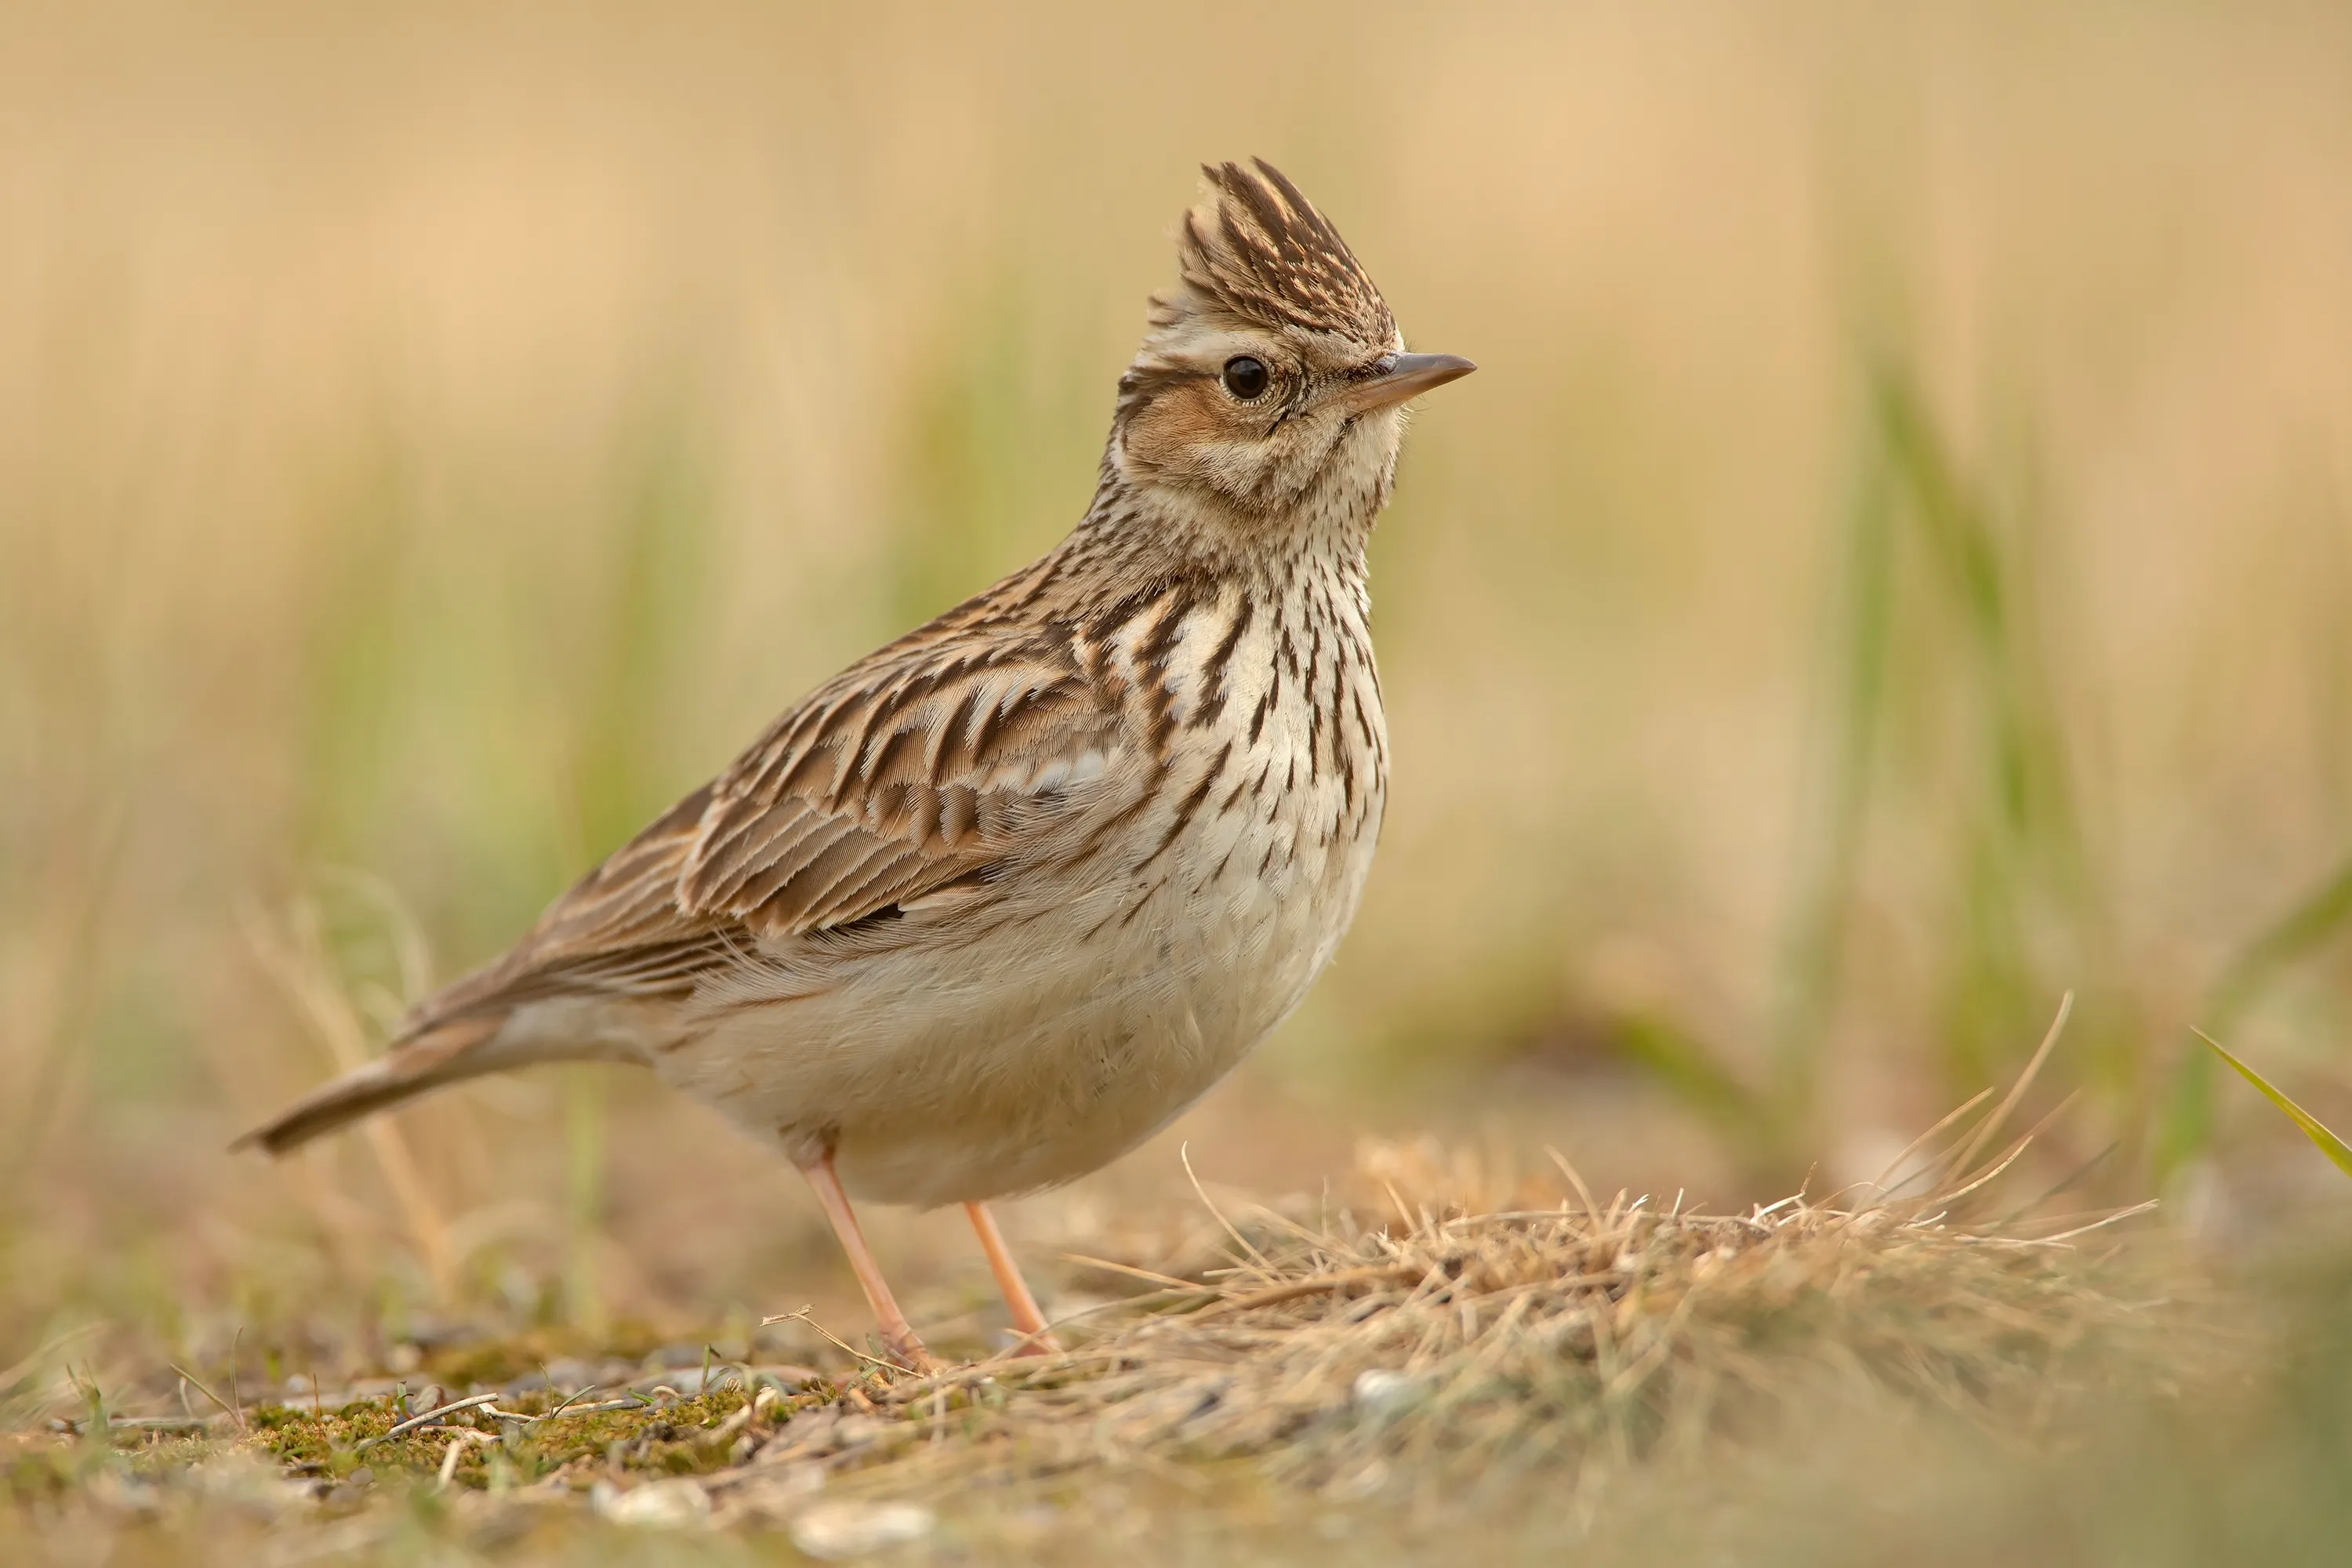 A lone Woodlark stood on the ground surrounded by grass.